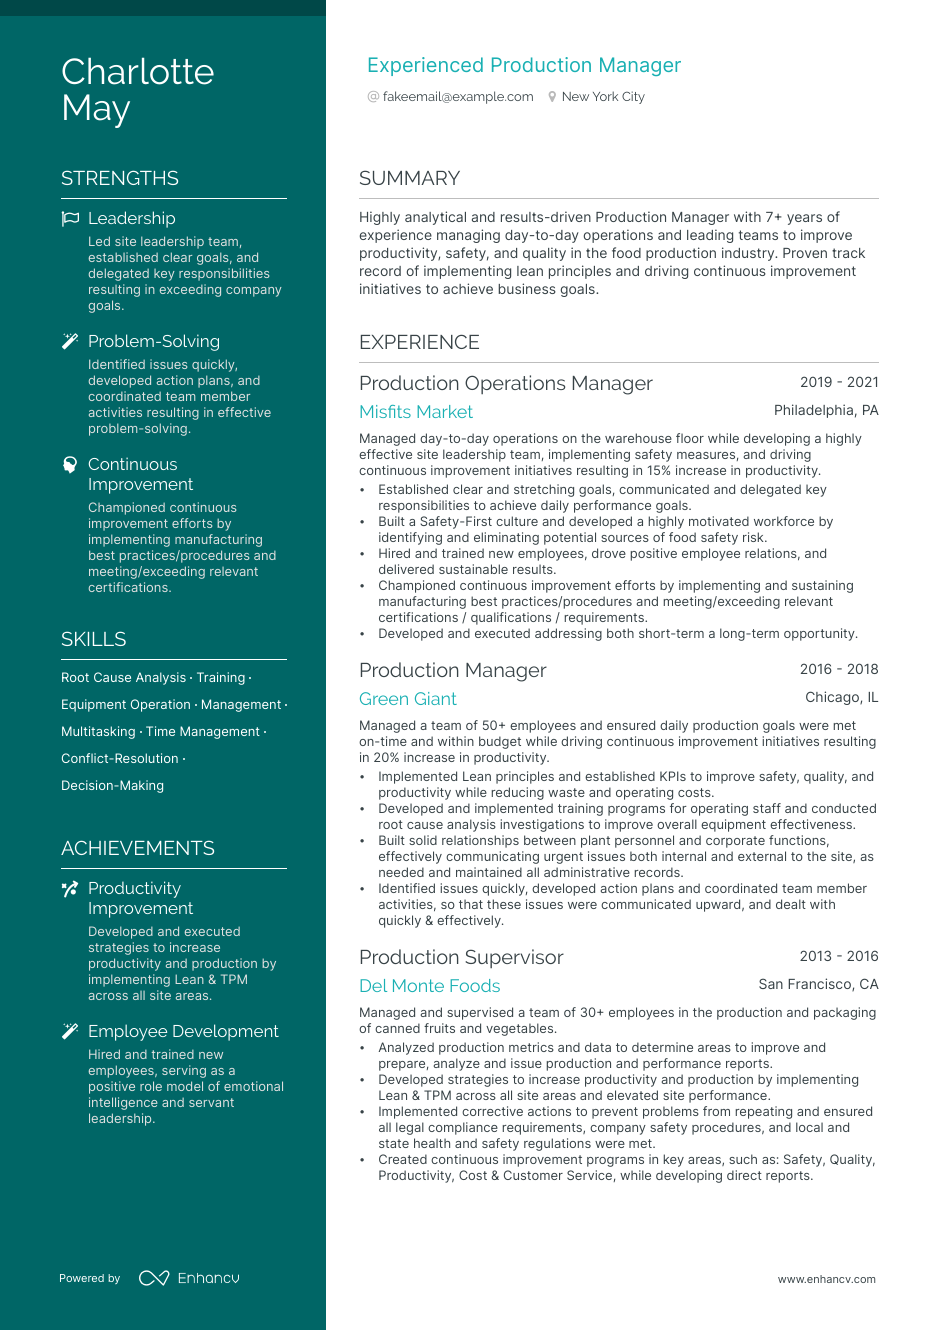 production manager resume example